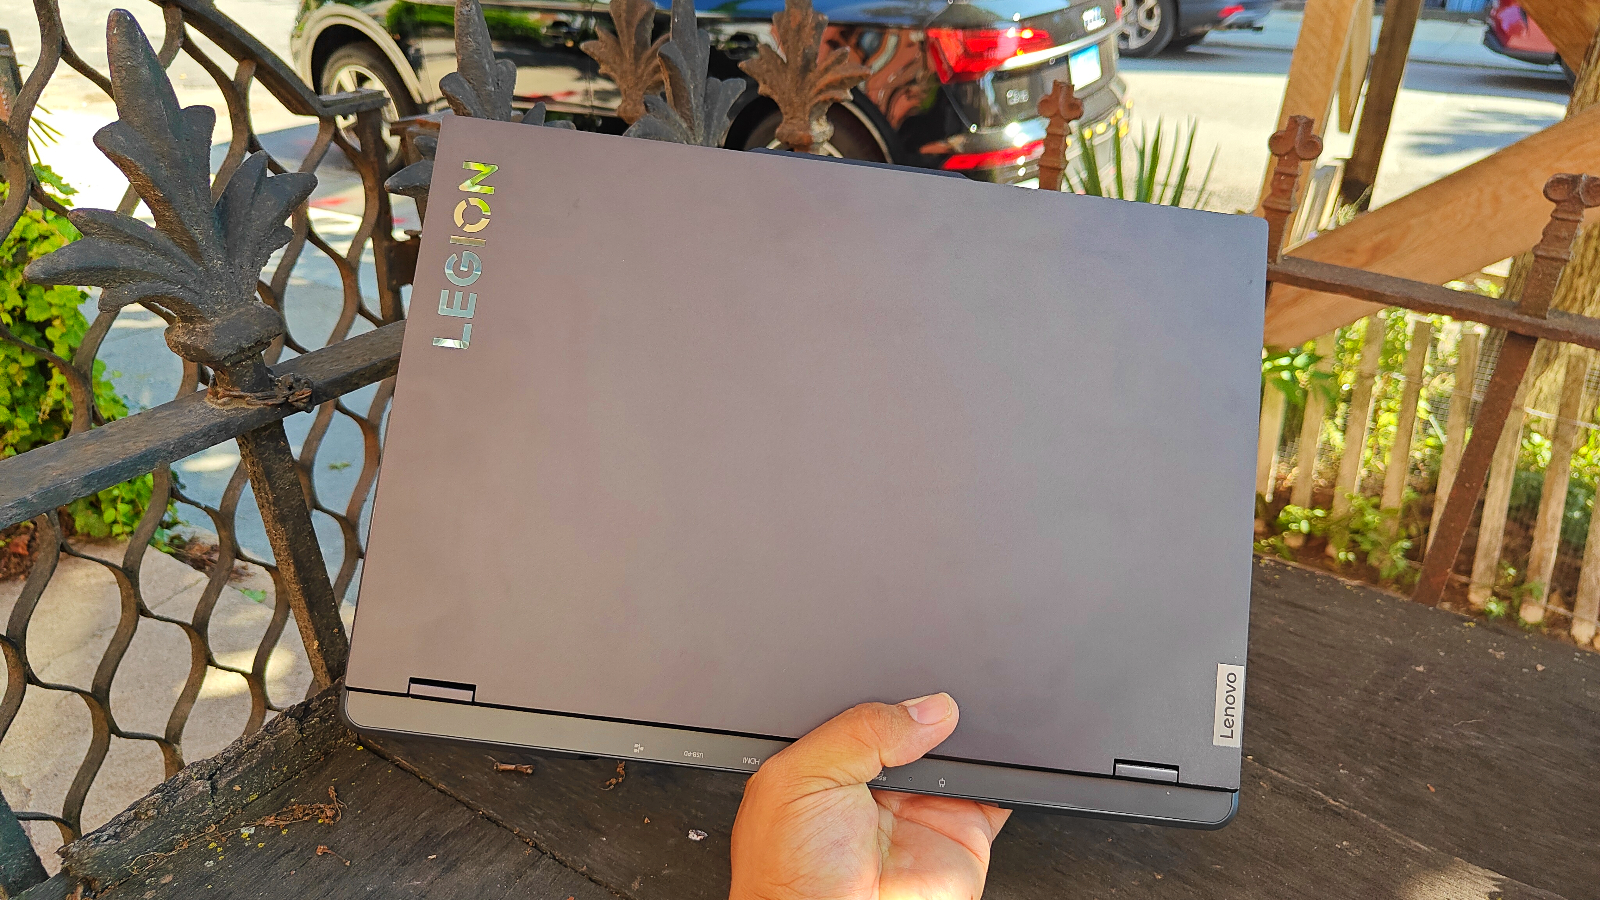 Lenovo Legion Pro 5i review: Subtle styling, performance, and price tag make this a win.